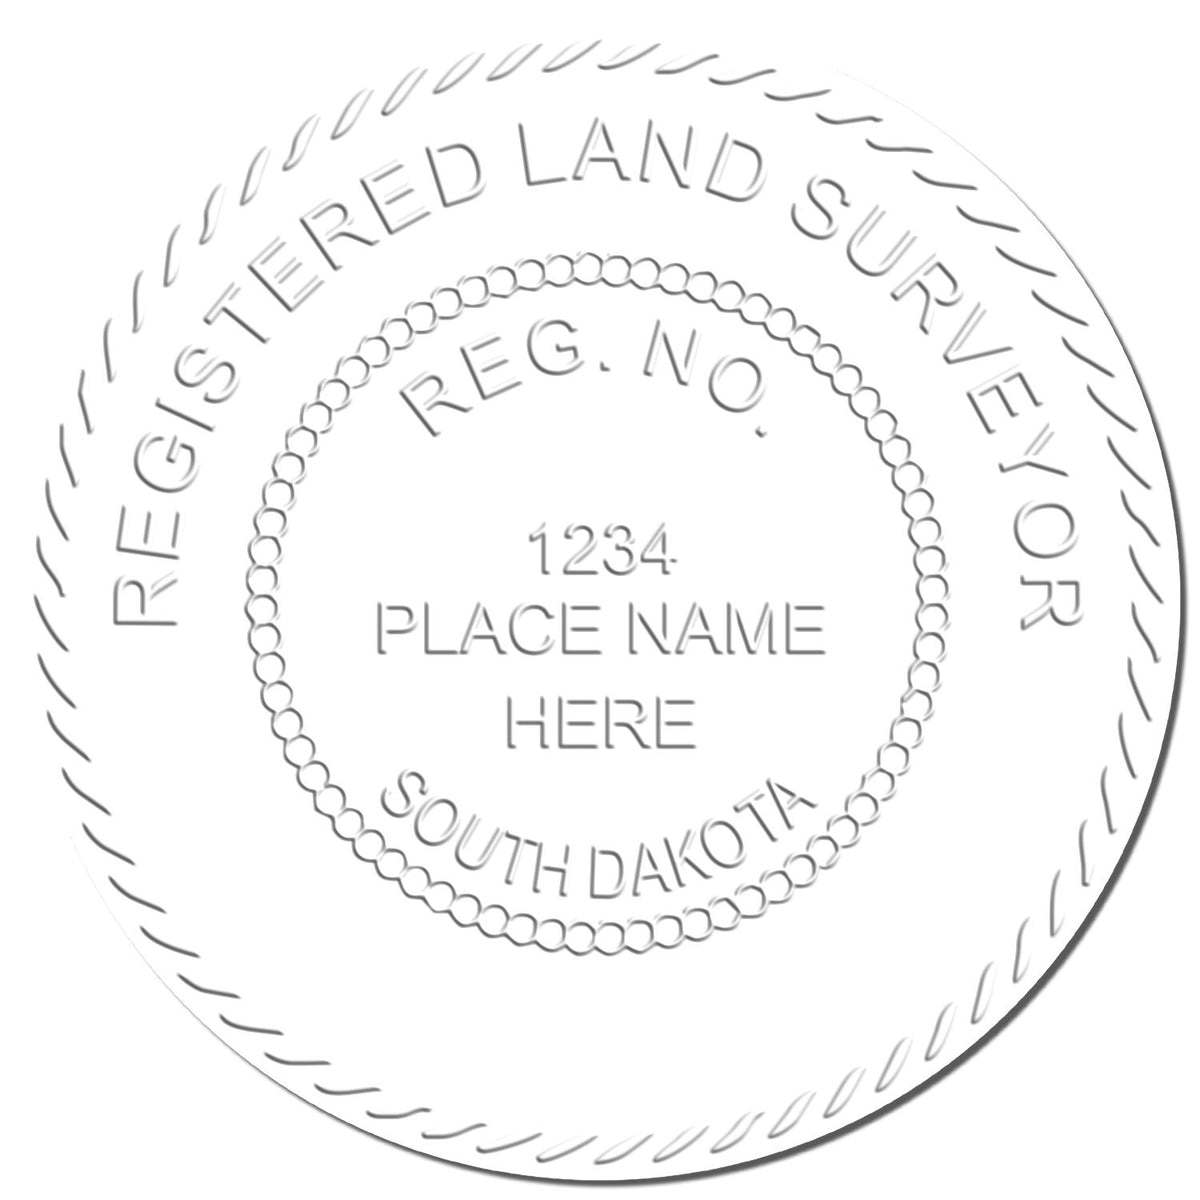 This paper is stamped with a sample imprint of the Hybrid South Dakota Land Surveyor Seal, signifying its quality and reliability.